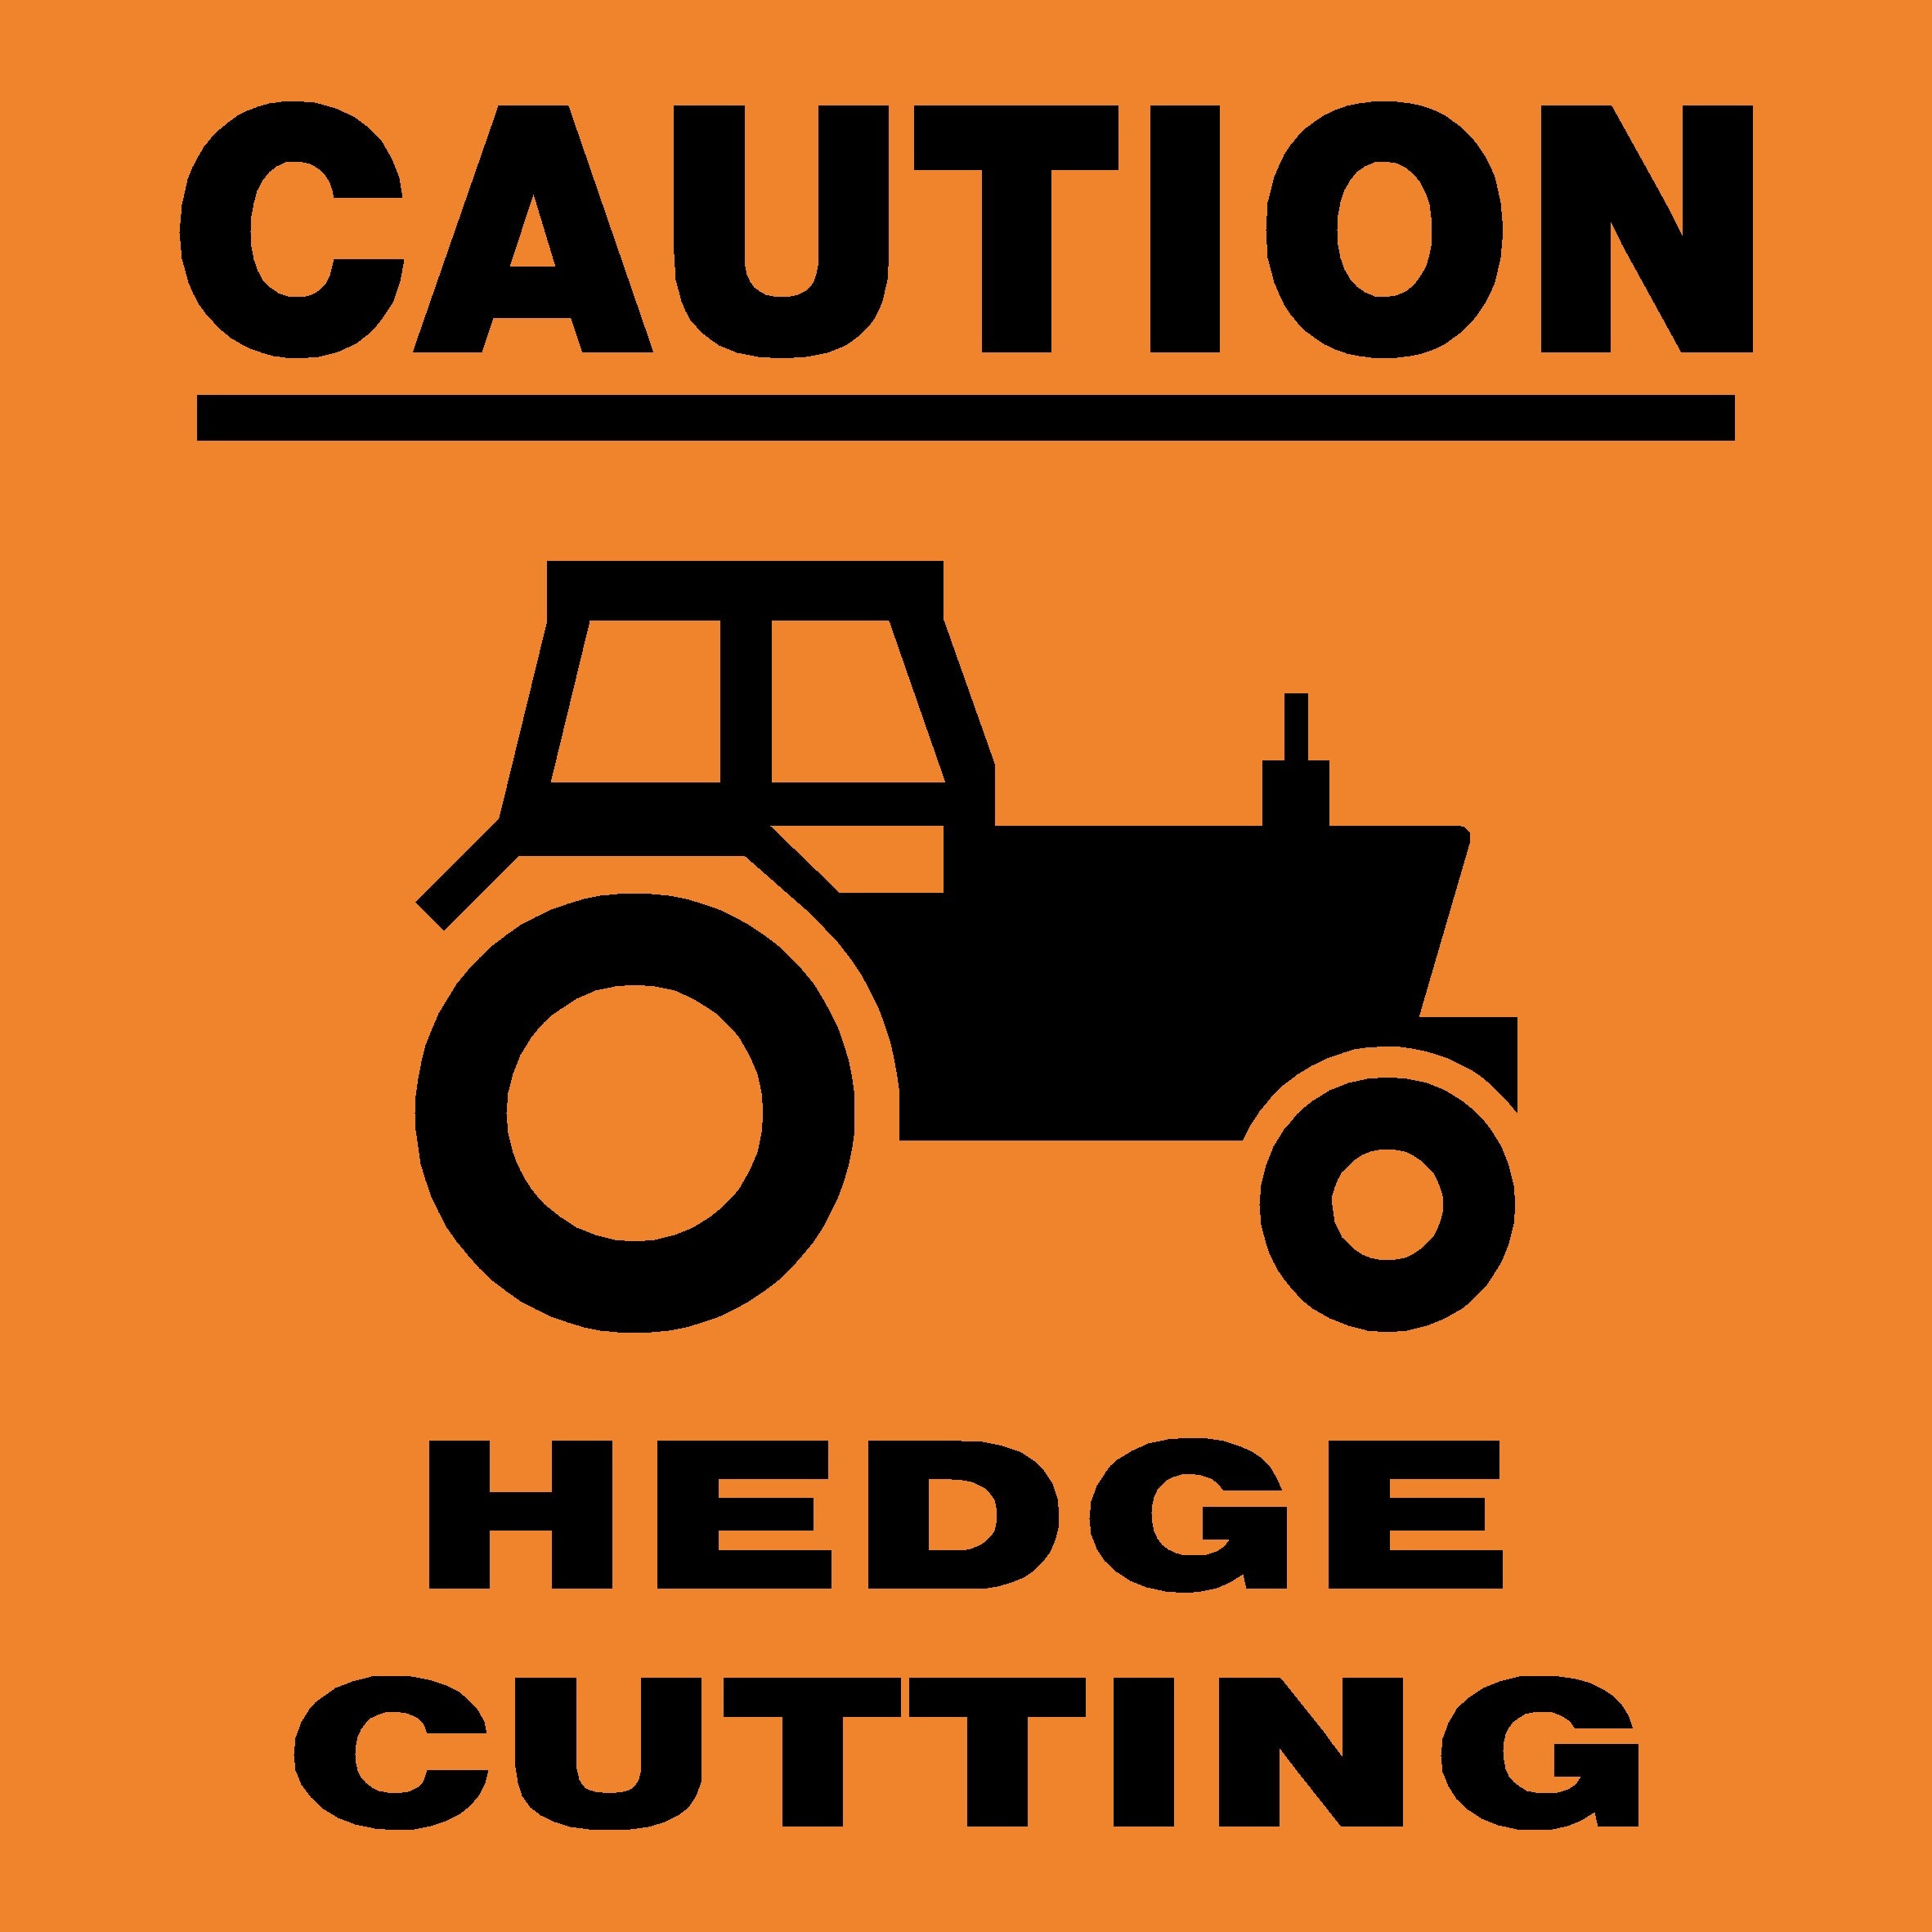 Caution Hedge Cutting Safety Sign